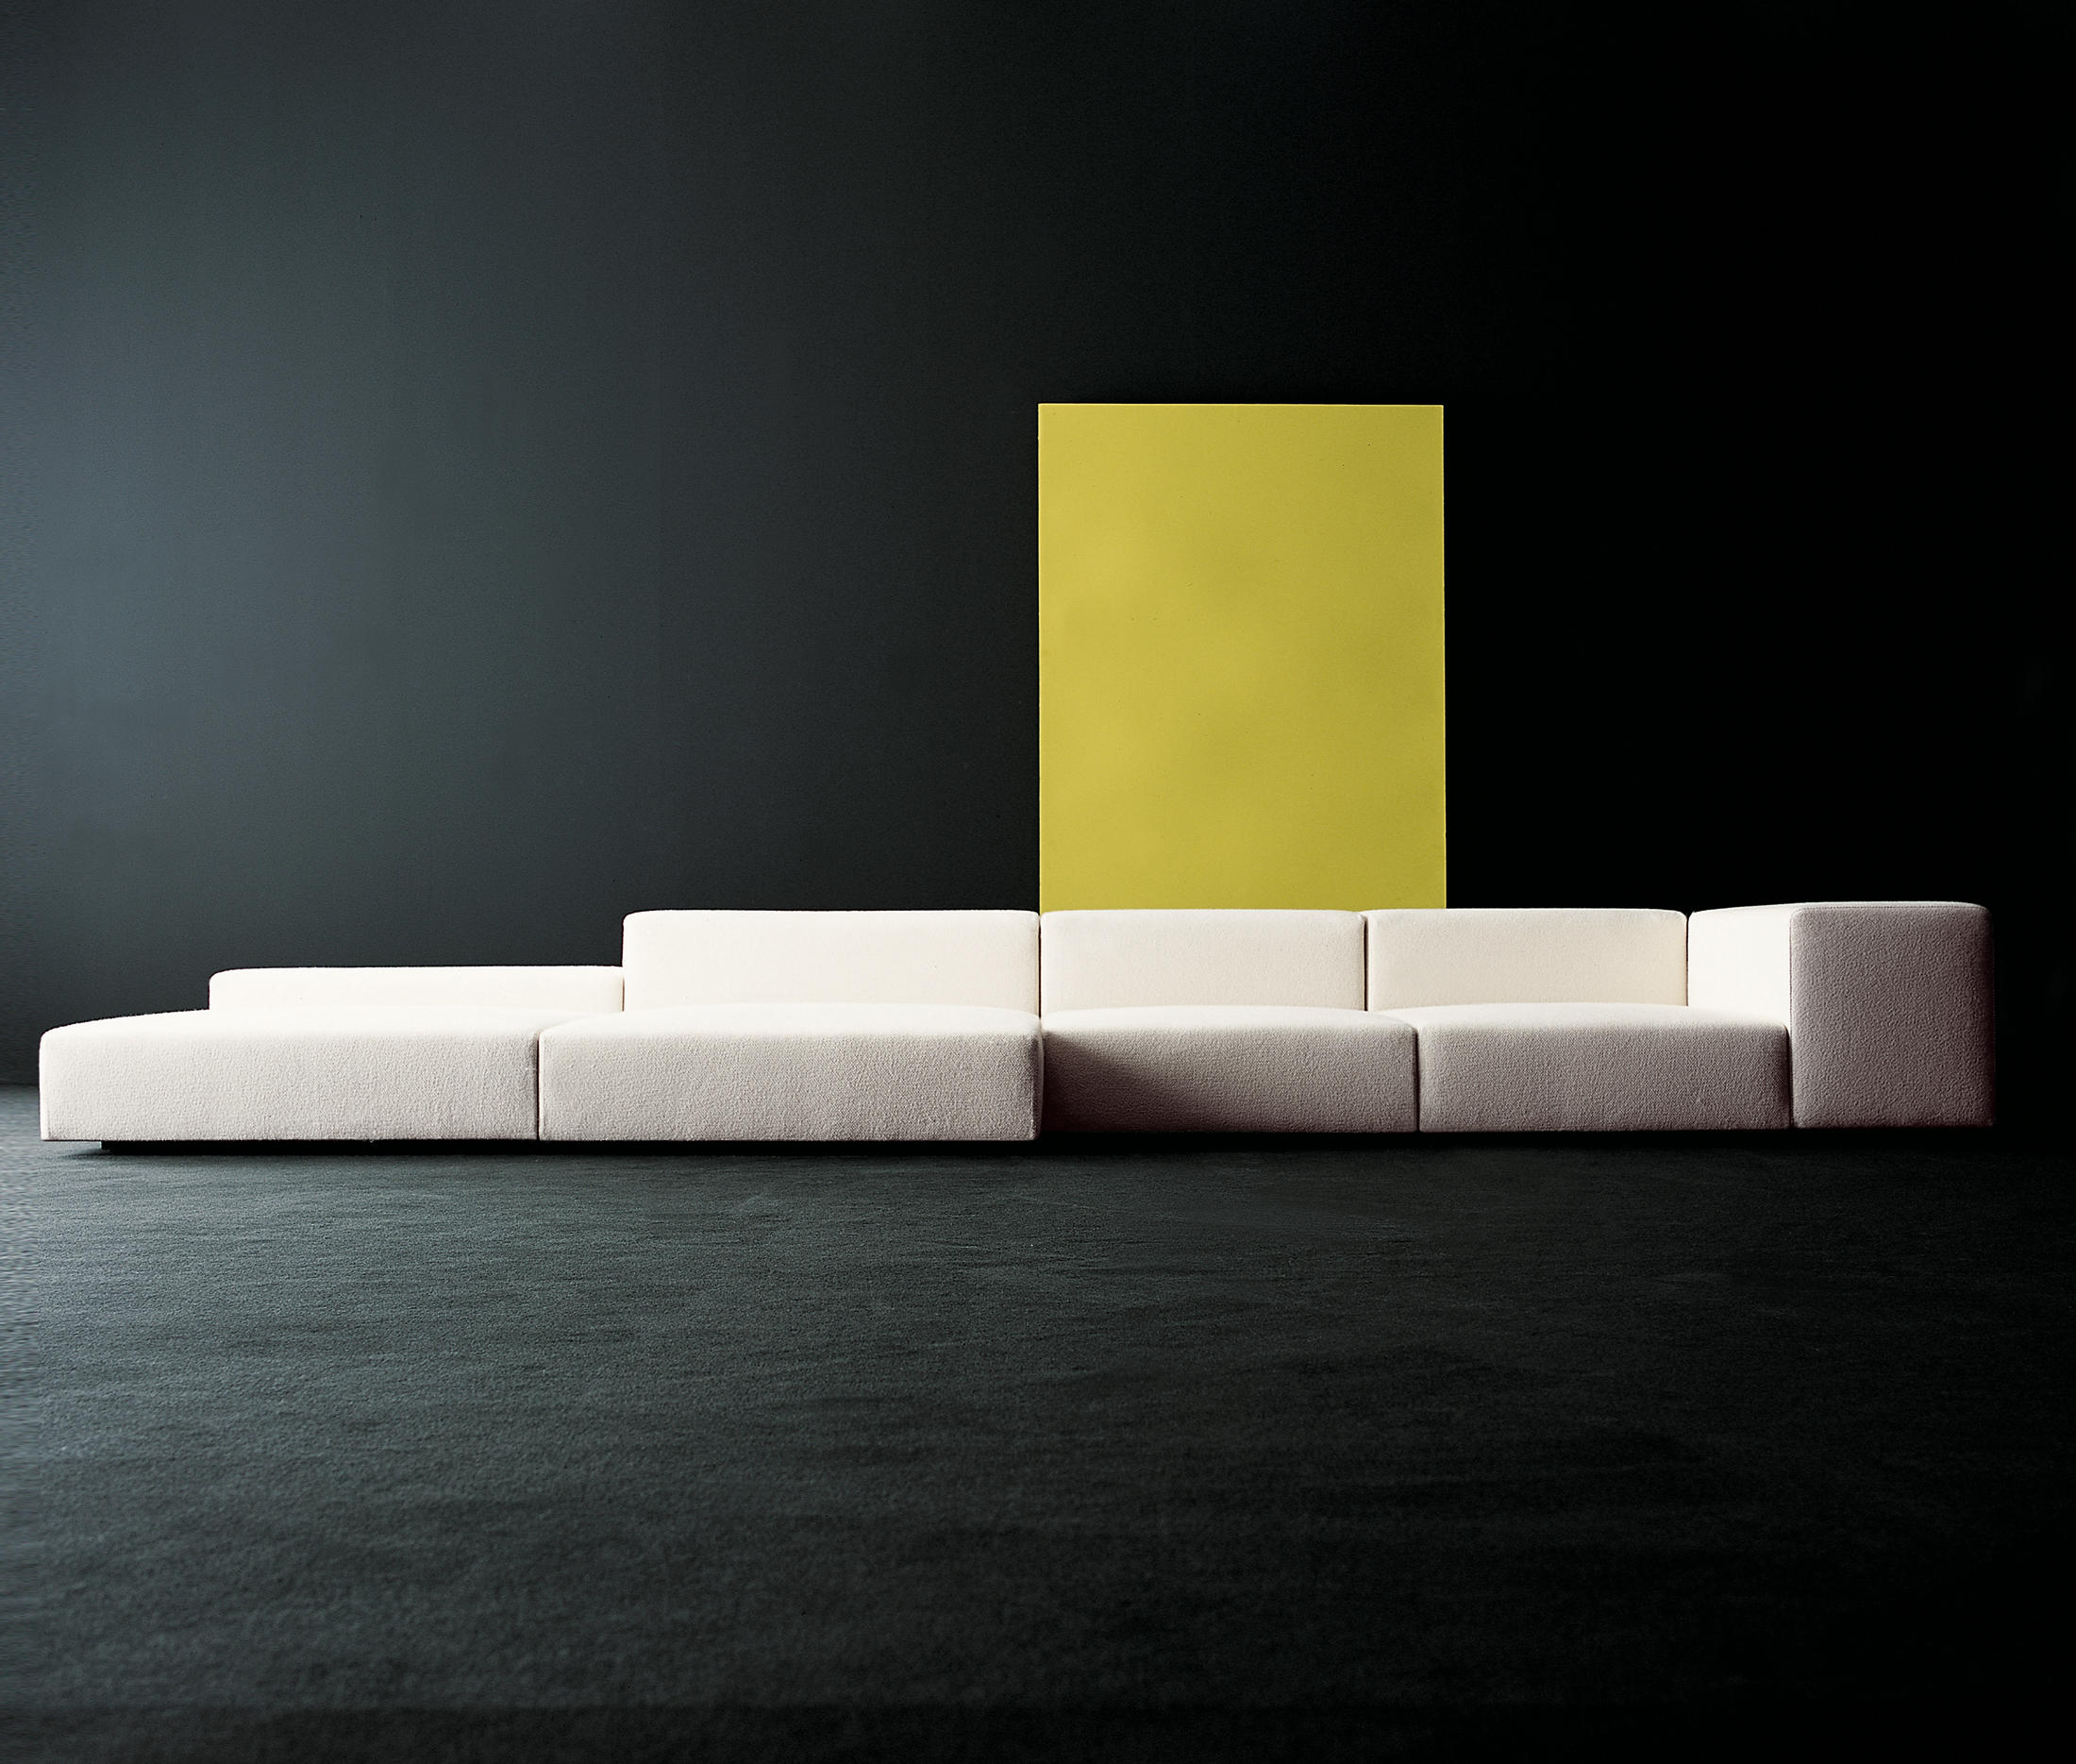 EXTRA WALL MODULAR SOFA SYSTEM Modular seating systems from